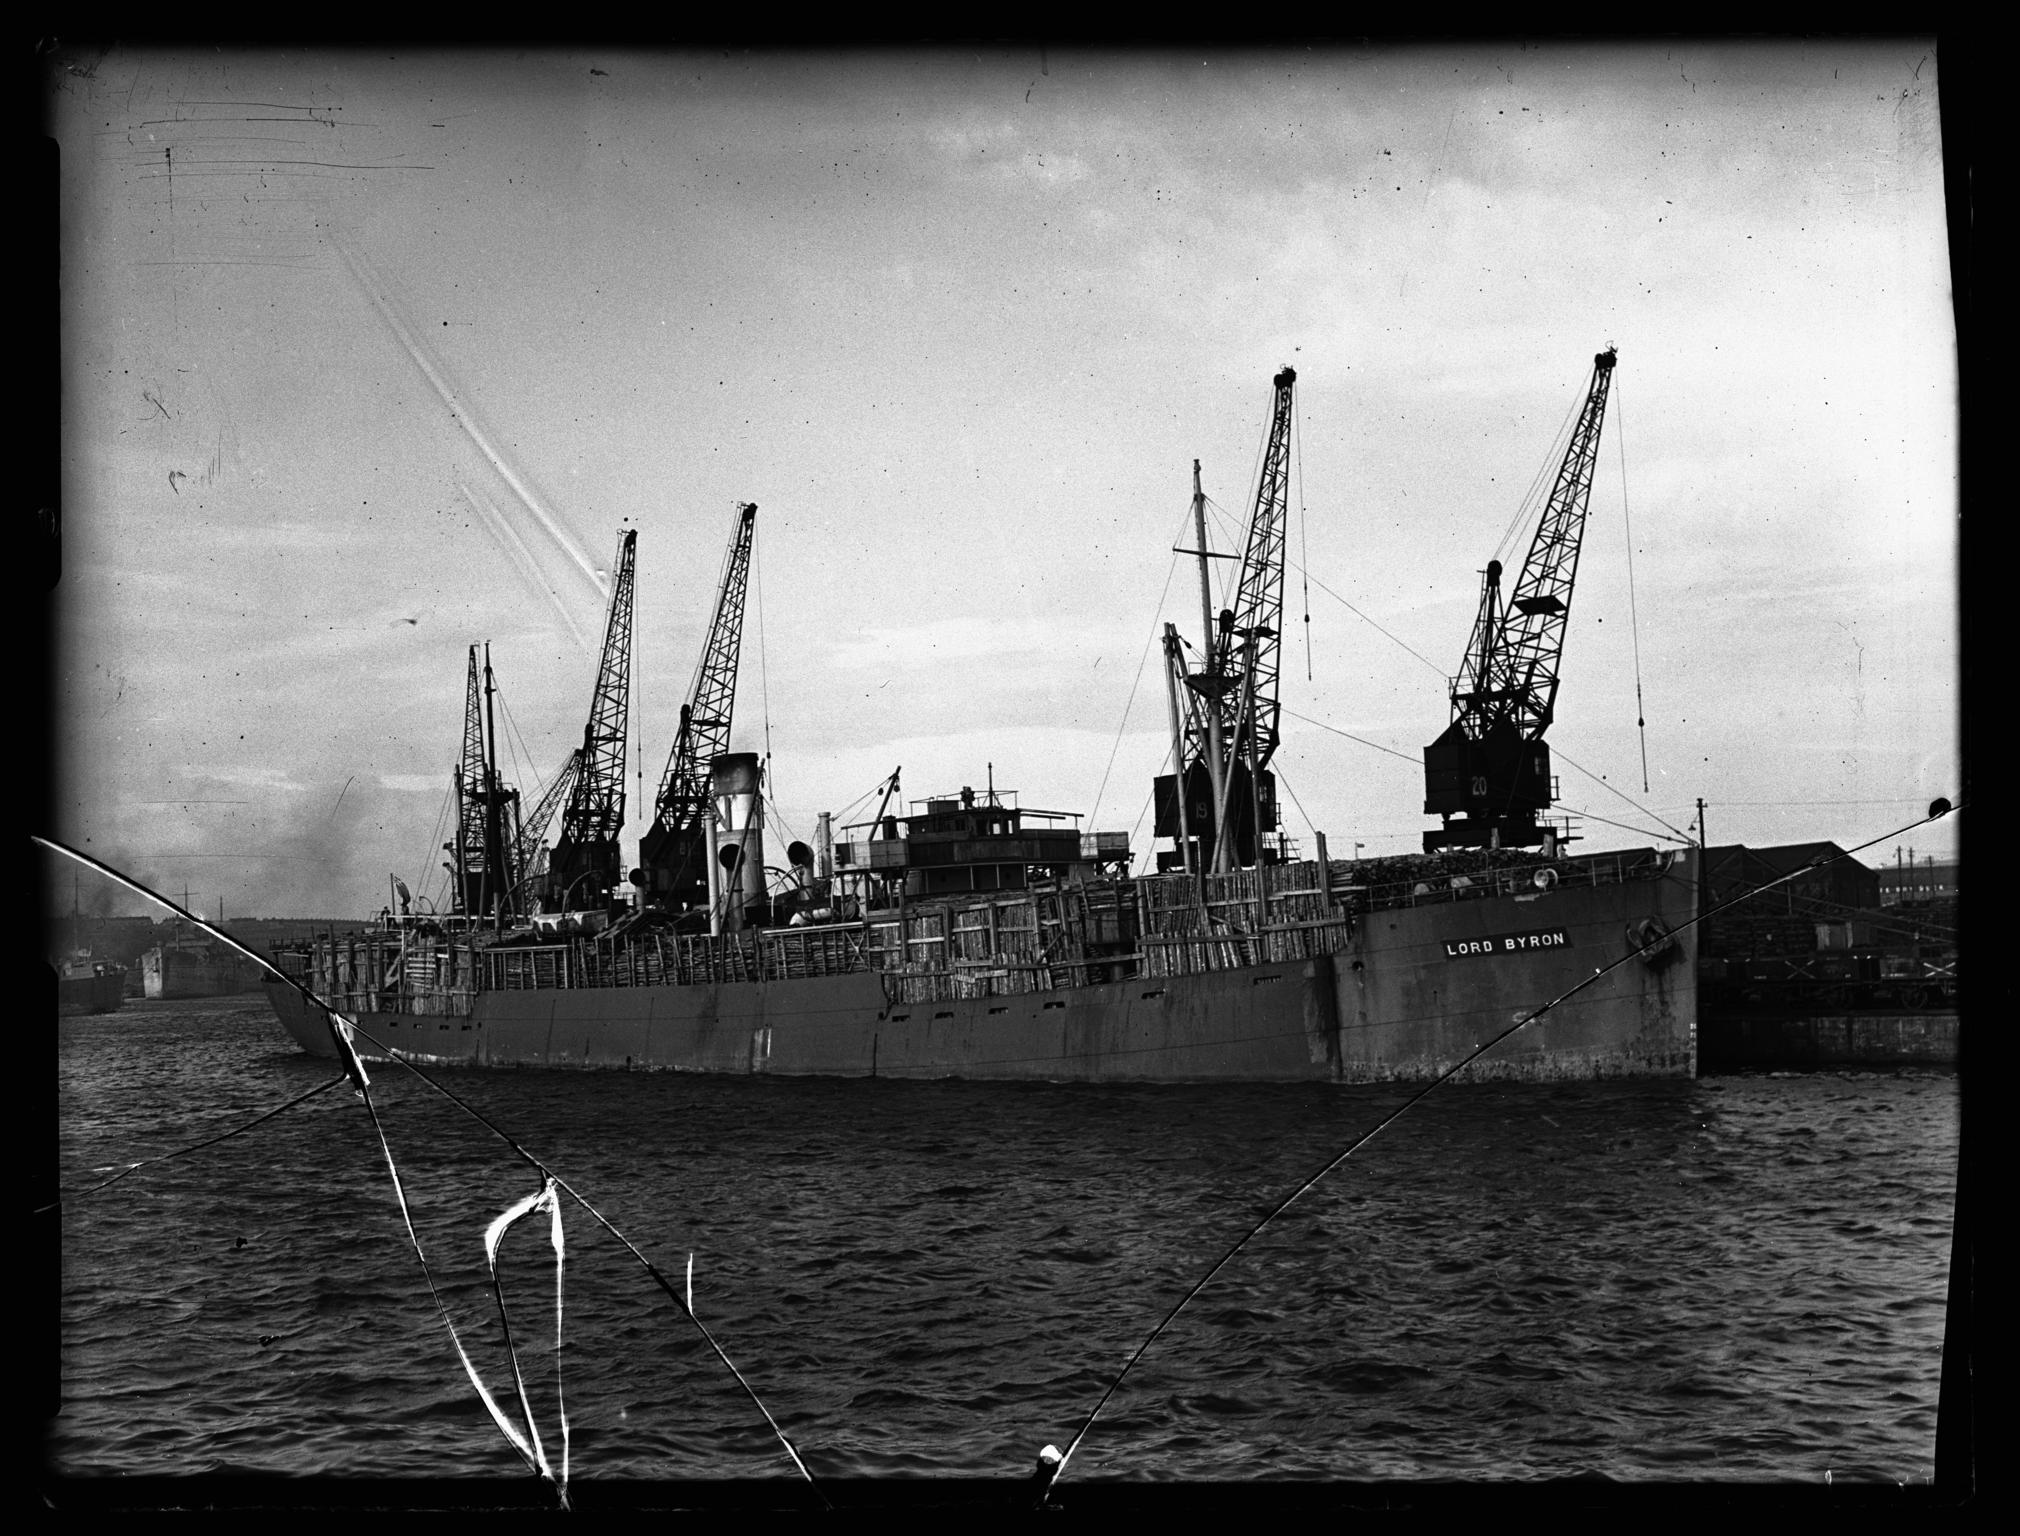 S.S. LORD BYRON, glass negative